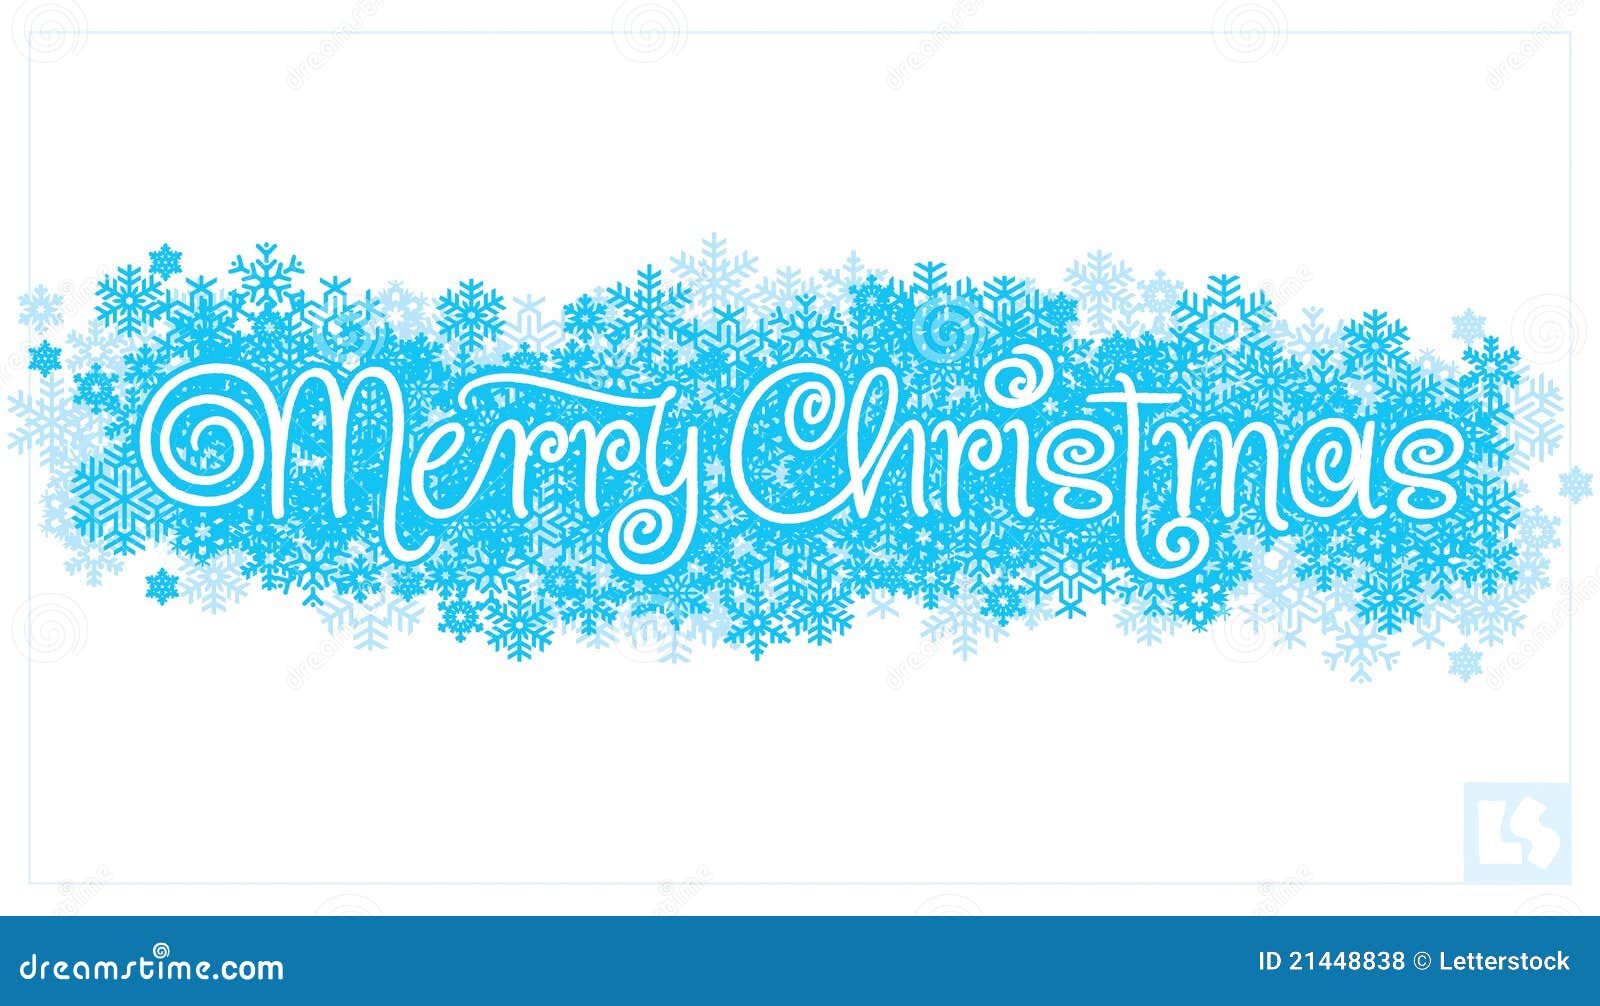 christmas clip art for email signature - photo #9